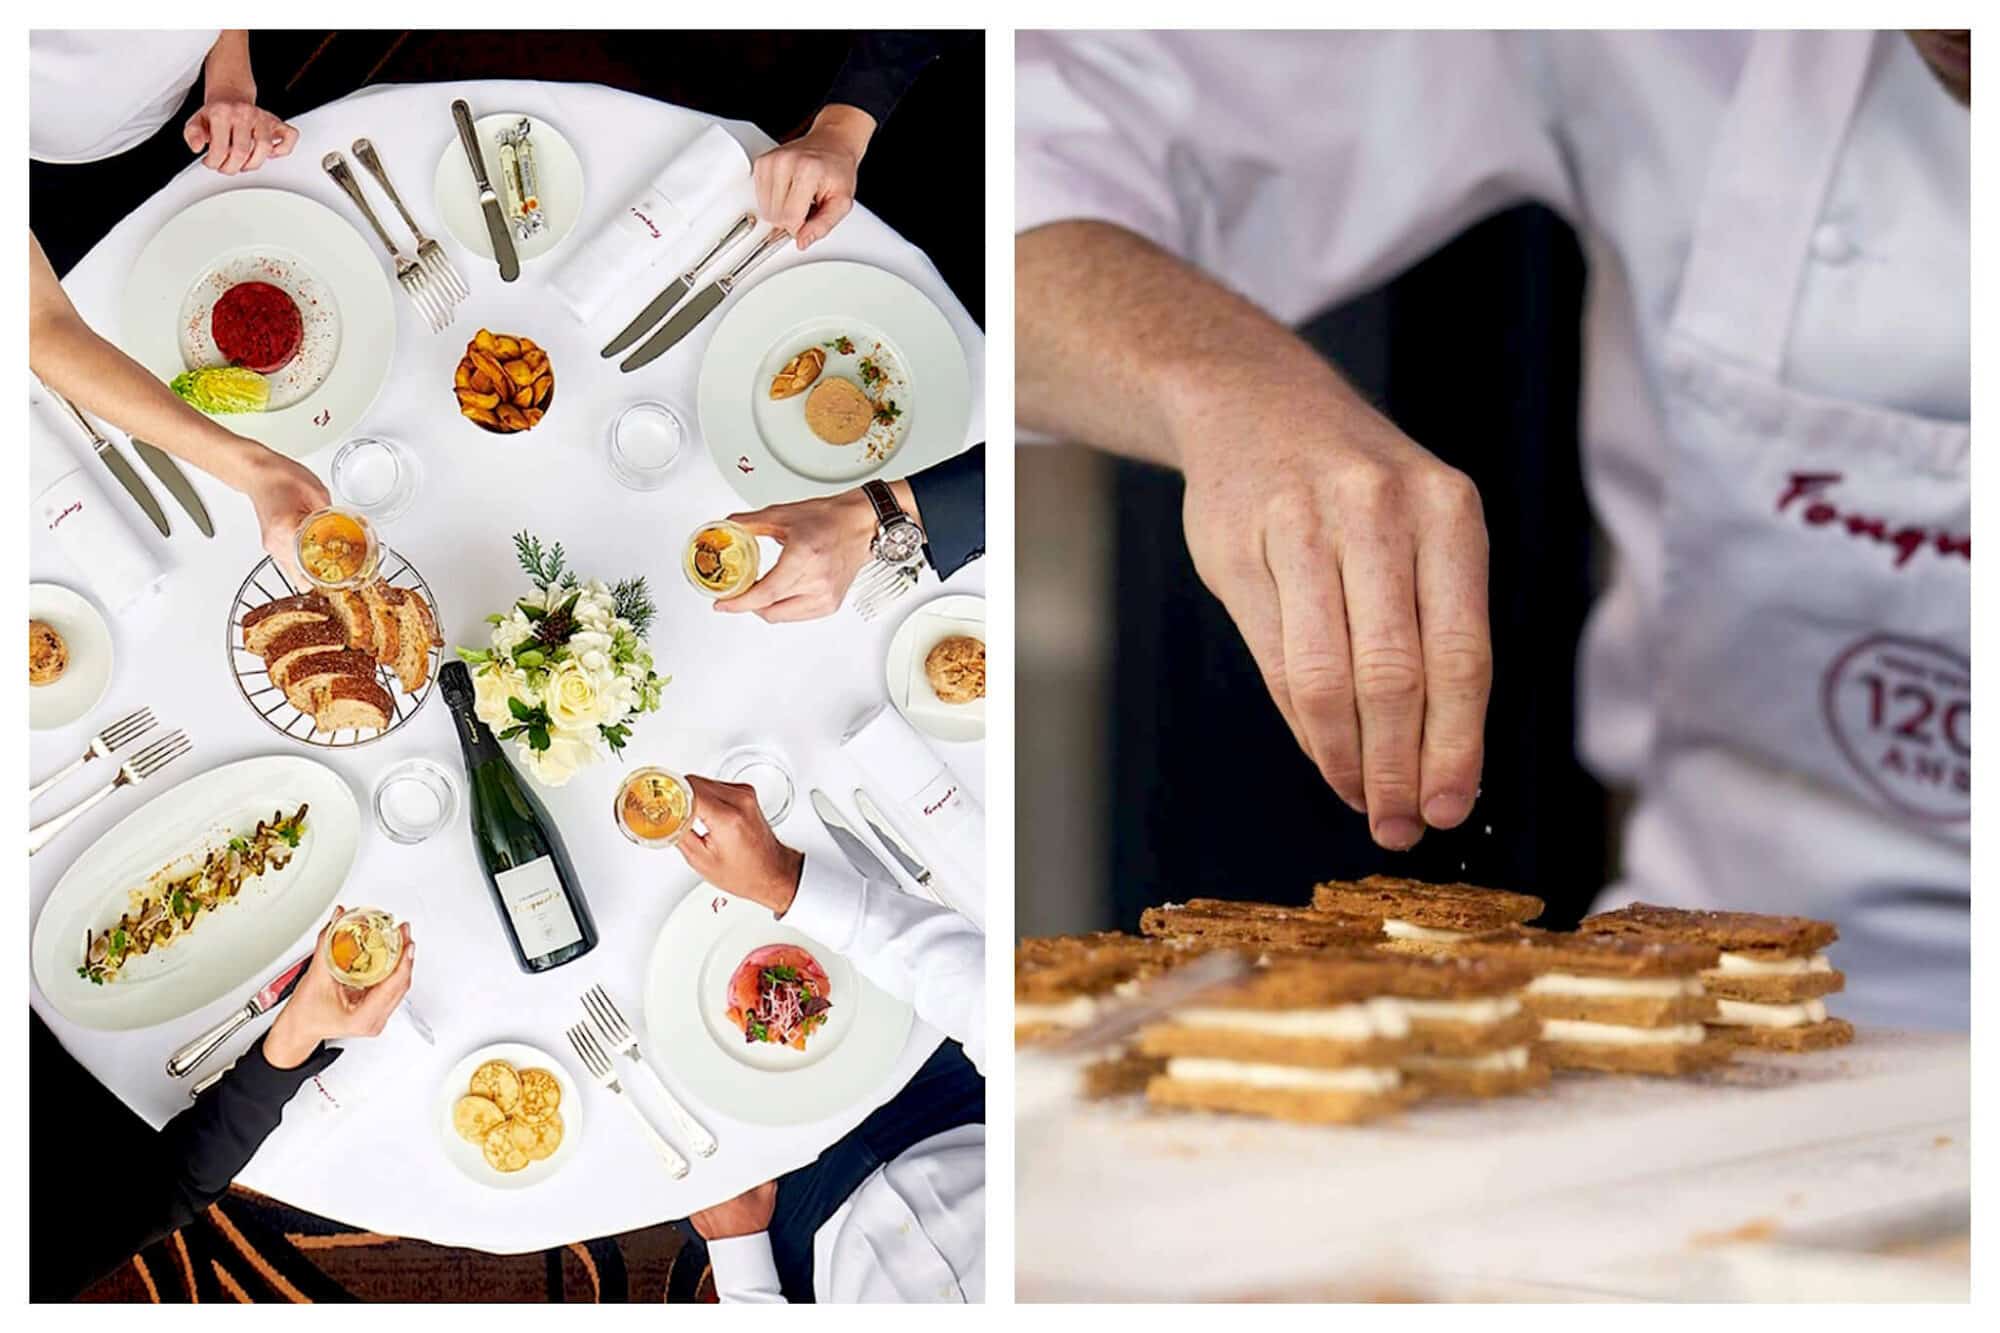 Left: An overhead shot of a group of people sharing a meal at Fouquet's in Paris. On the table are various plates of food, an arrangement of flowers, silverware and a bottle and glasses of wine, Right: A pastry chef at Fouquet's restaurant sprinkles an unidentifiable food atop pastries. 